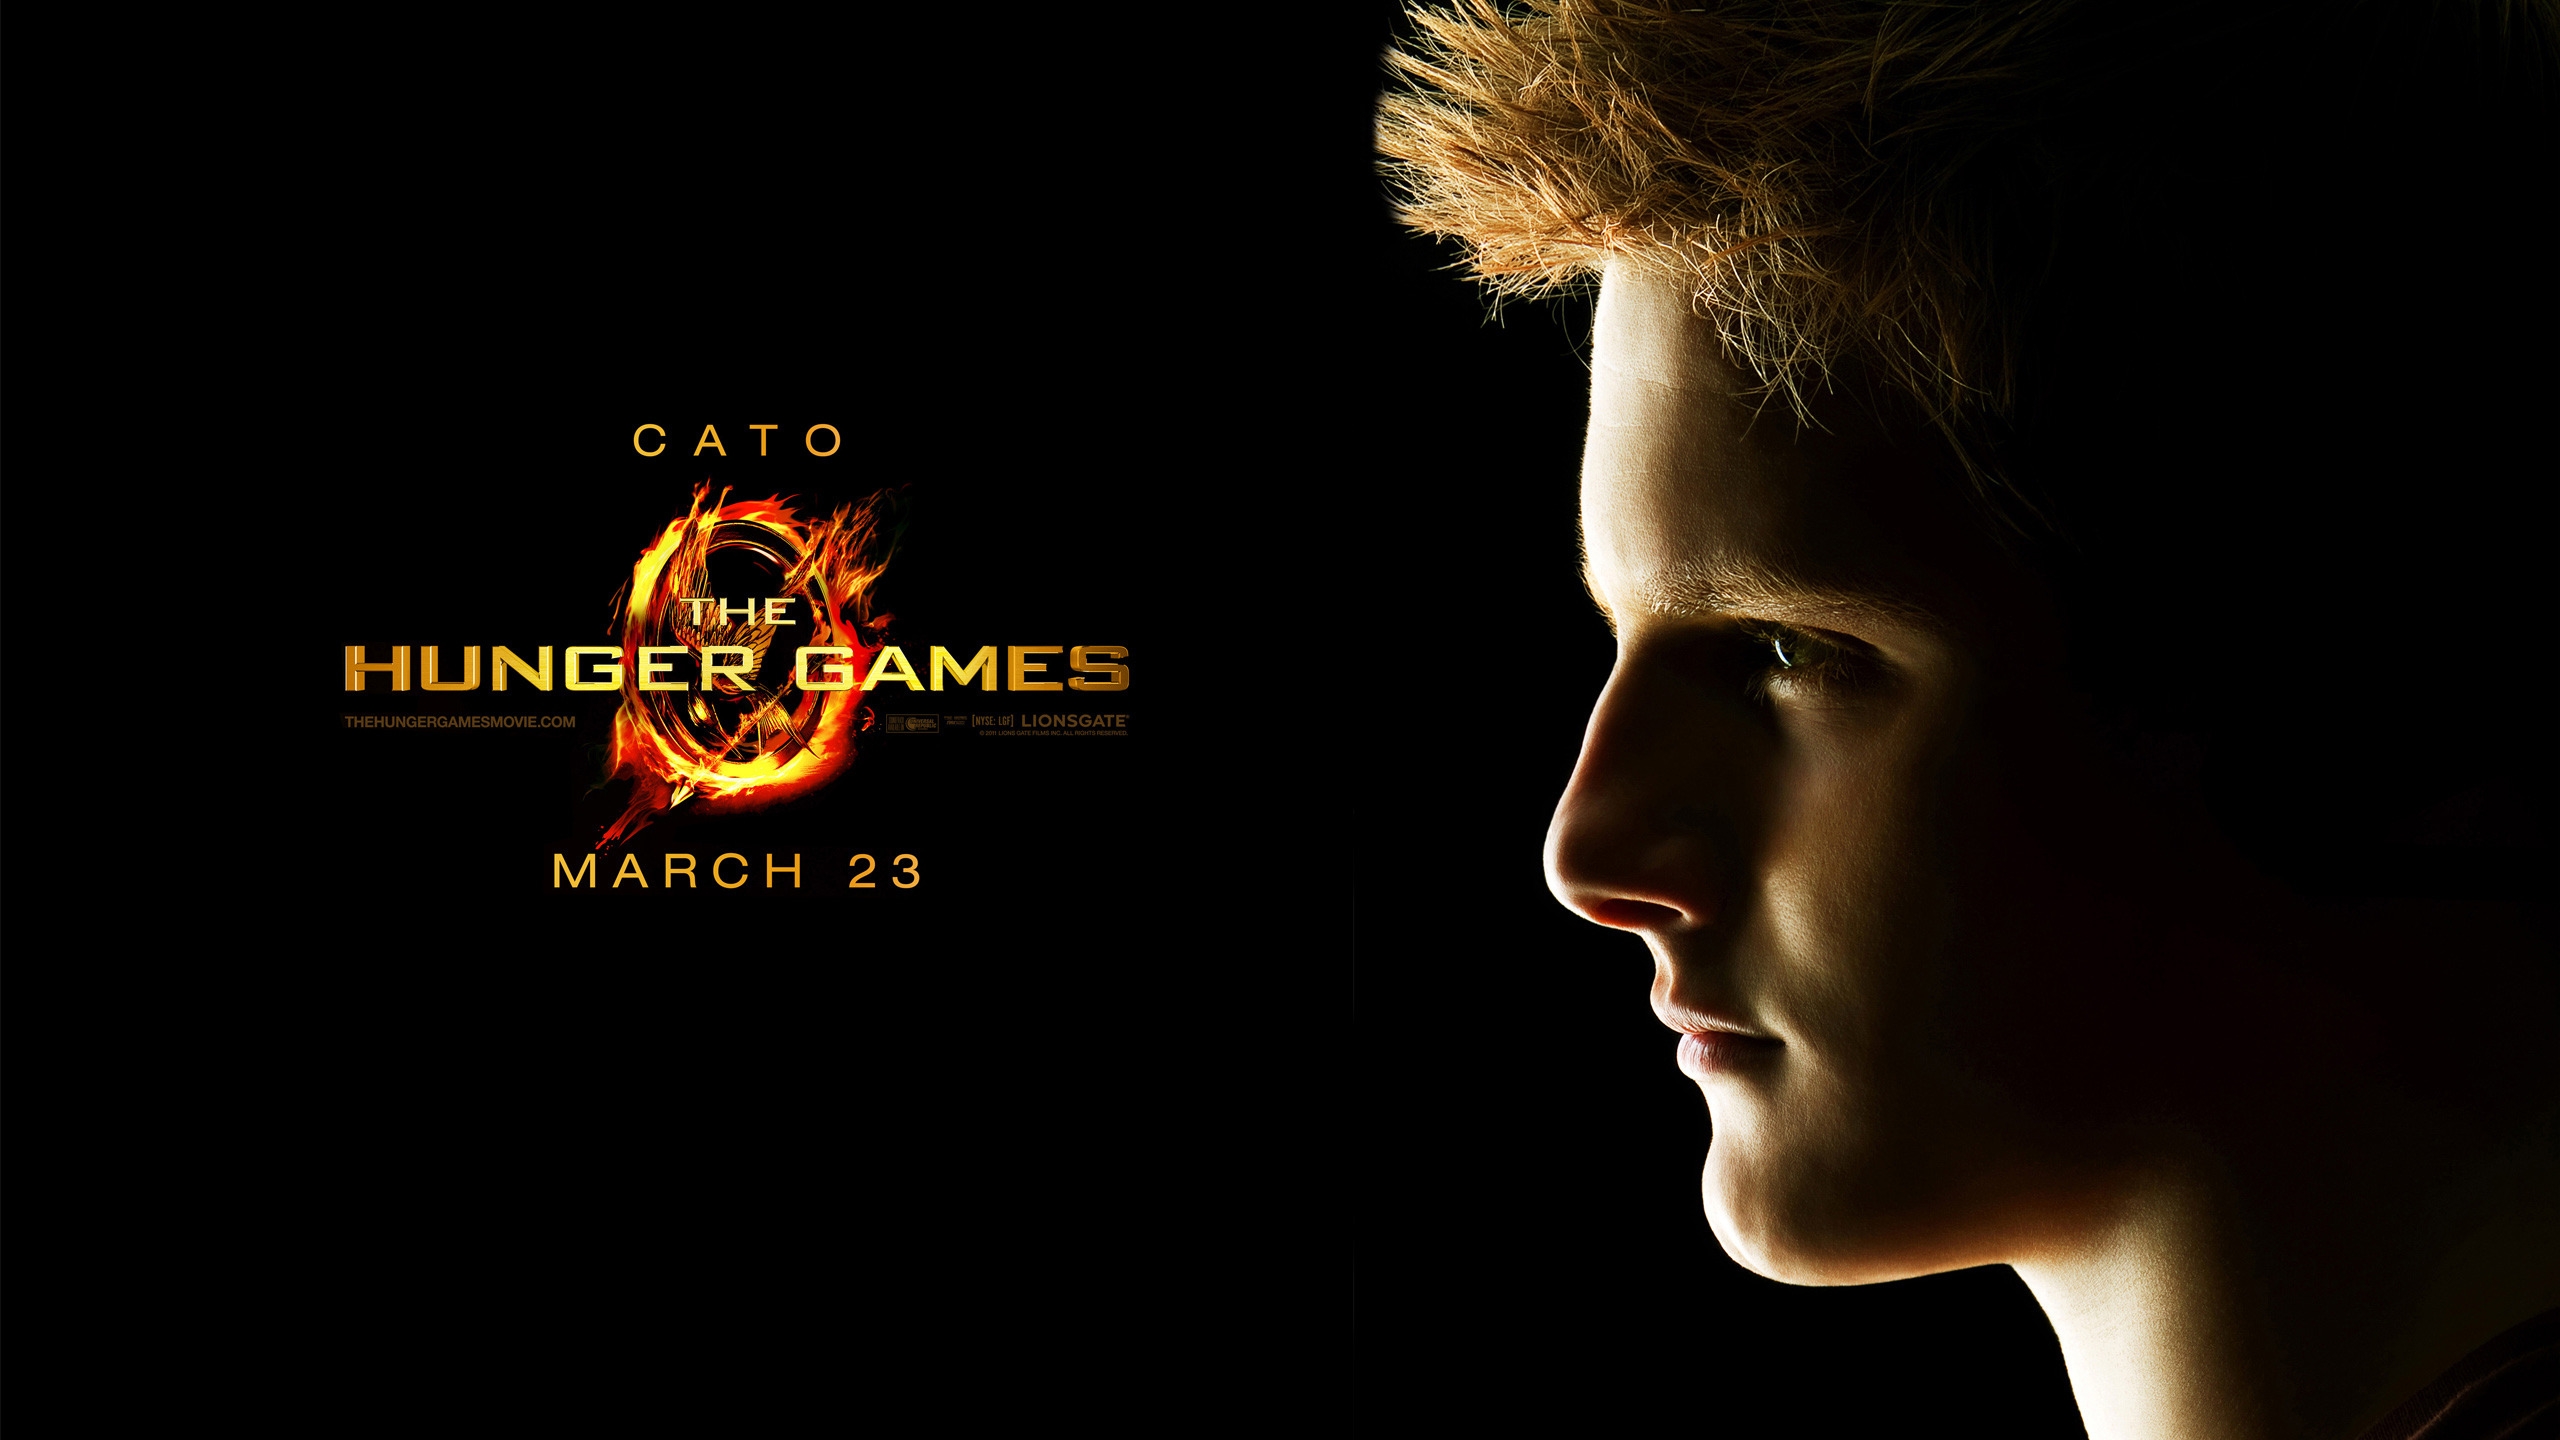 The Hunger Games Cato for 2560x1440 HDTV resolution